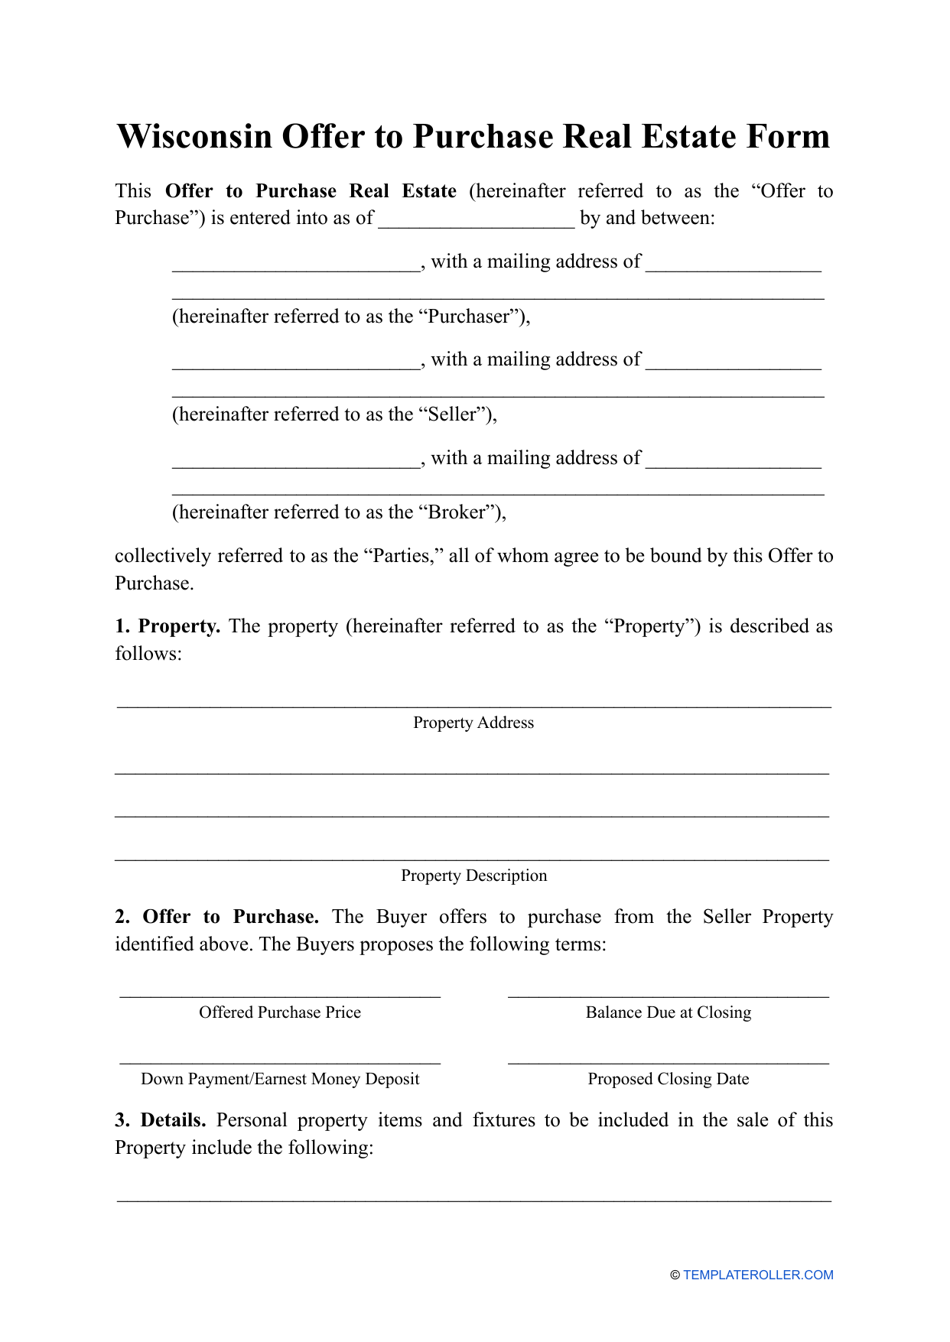 Offer to Purchase Real Estate Form - Wisconsin, Page 1